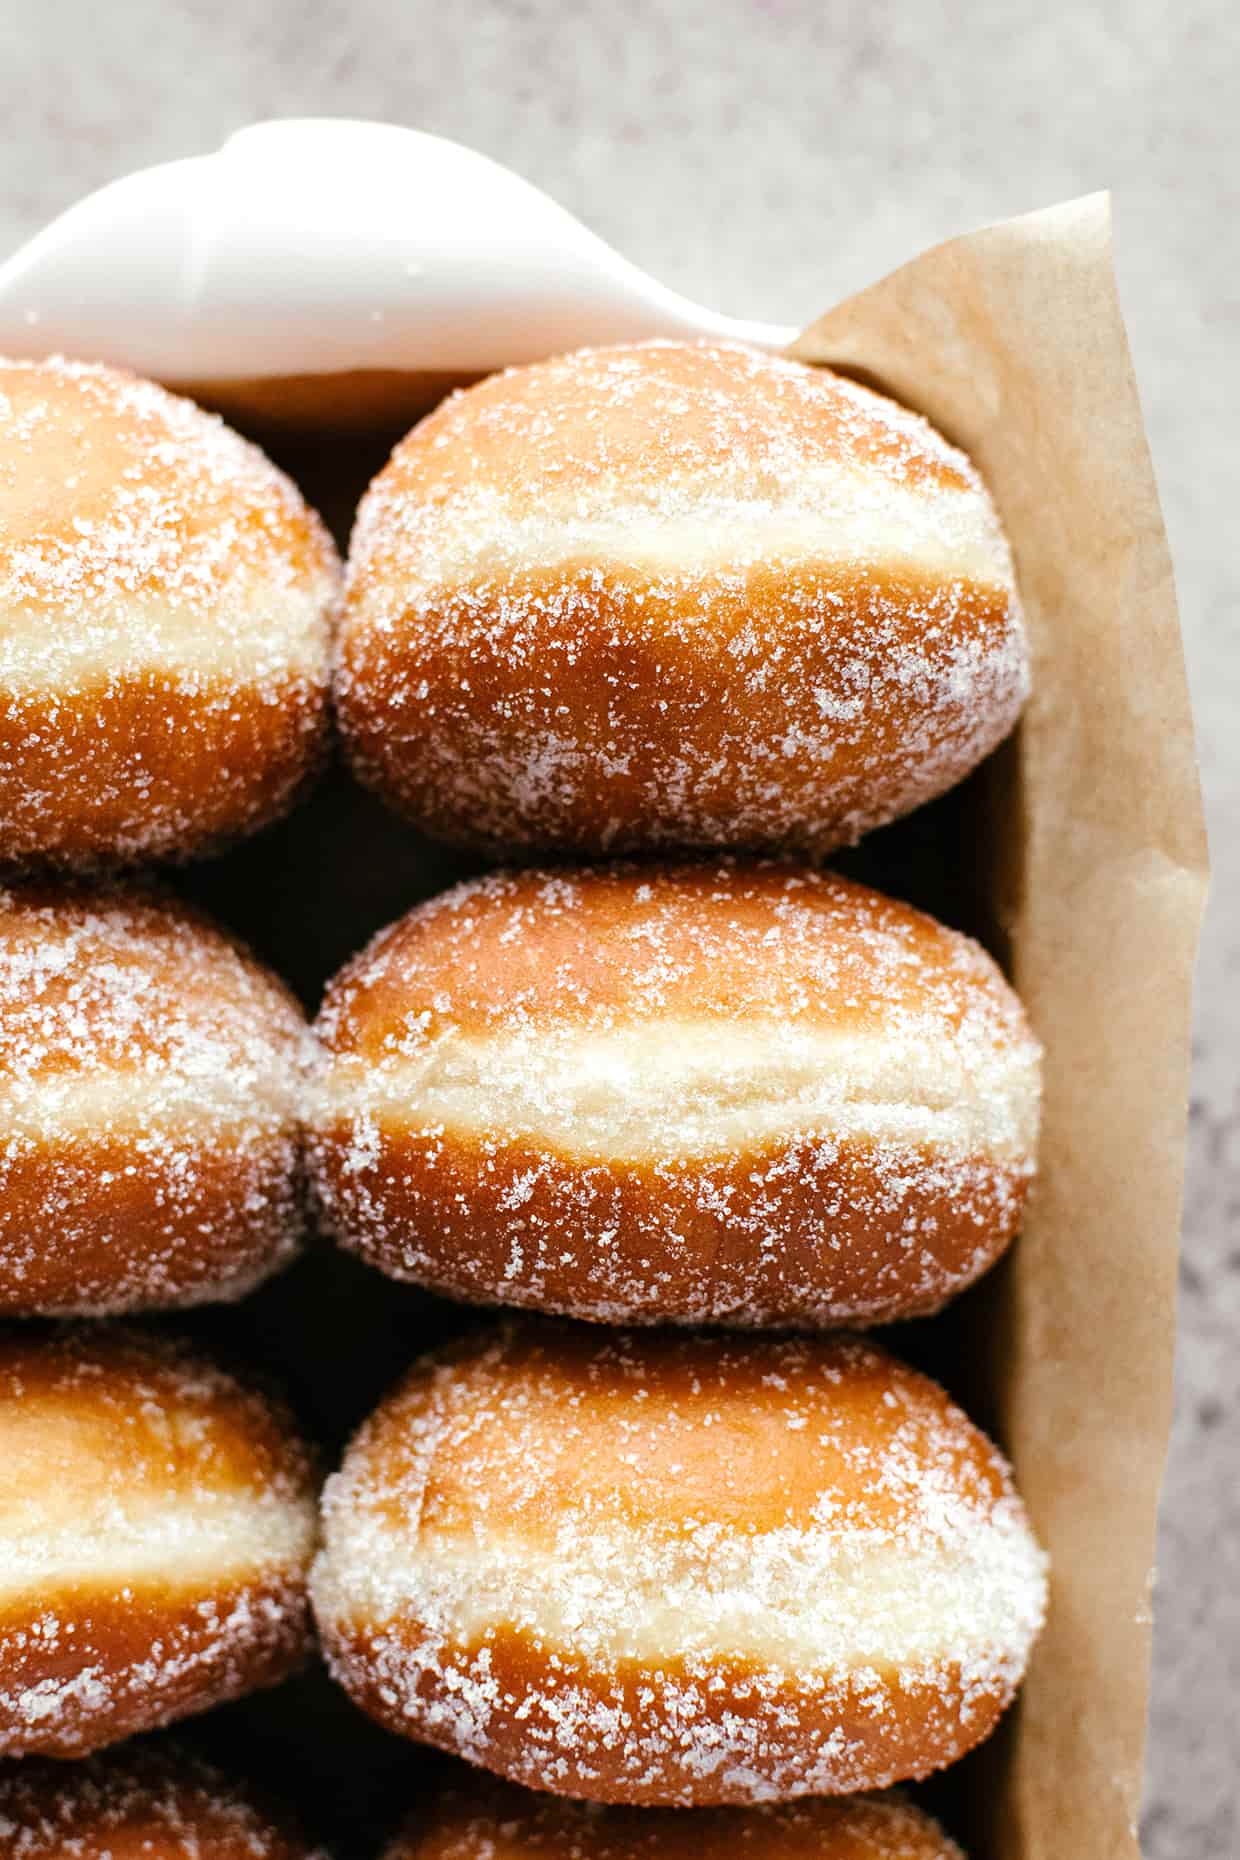 a baking dish filled with fresh fried golden brown doughnuts coated with granulated sugar 